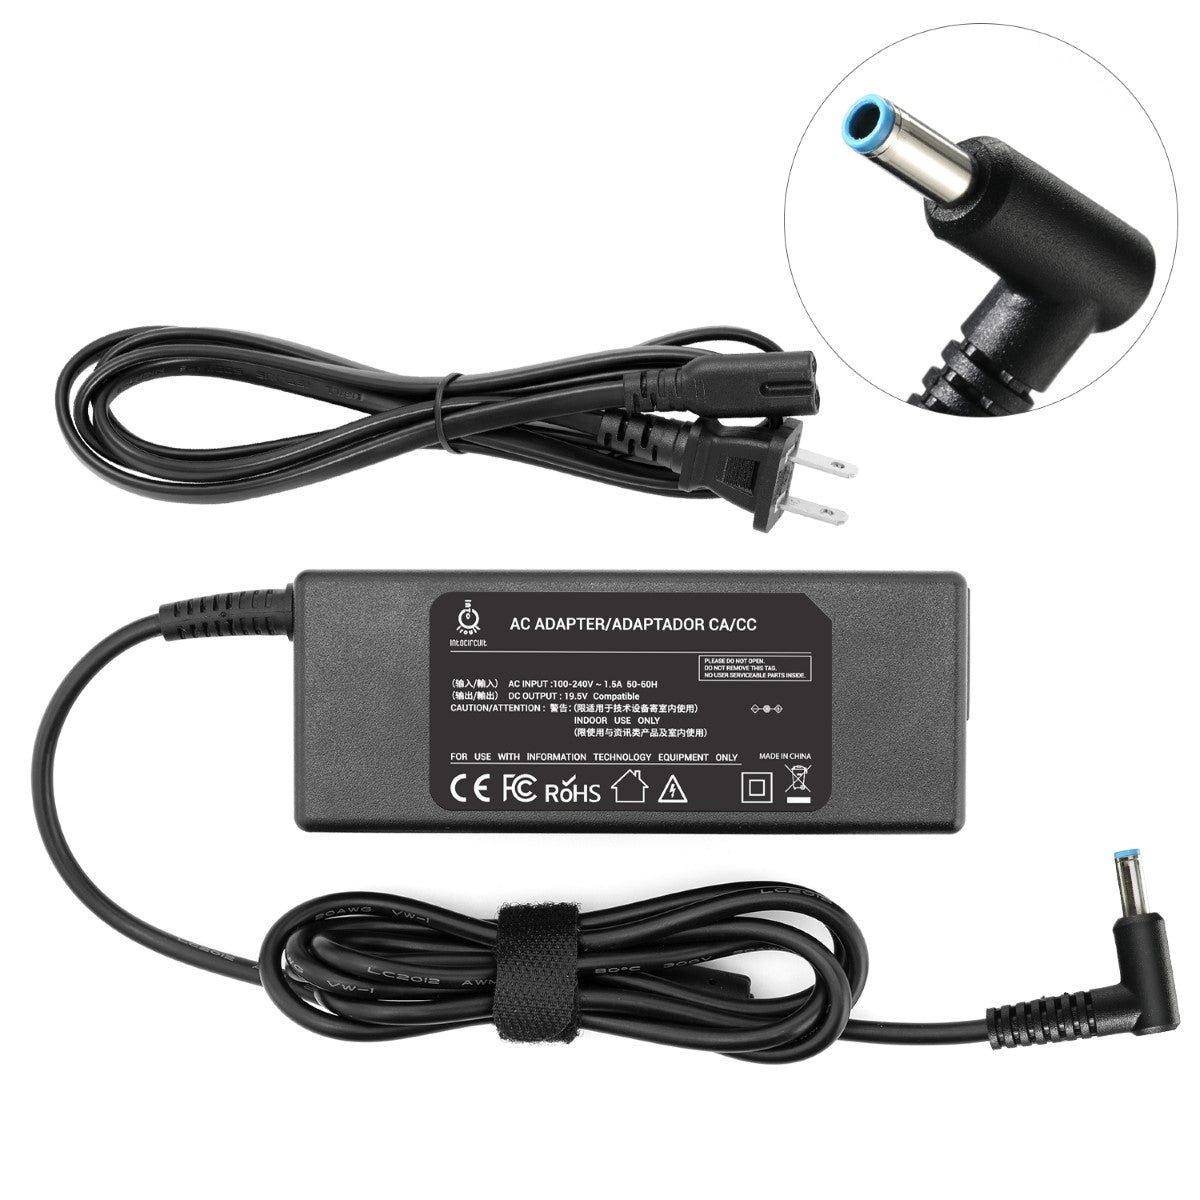 Charger for HP ENVY 15z-ee000 x360 Convertible Laptop